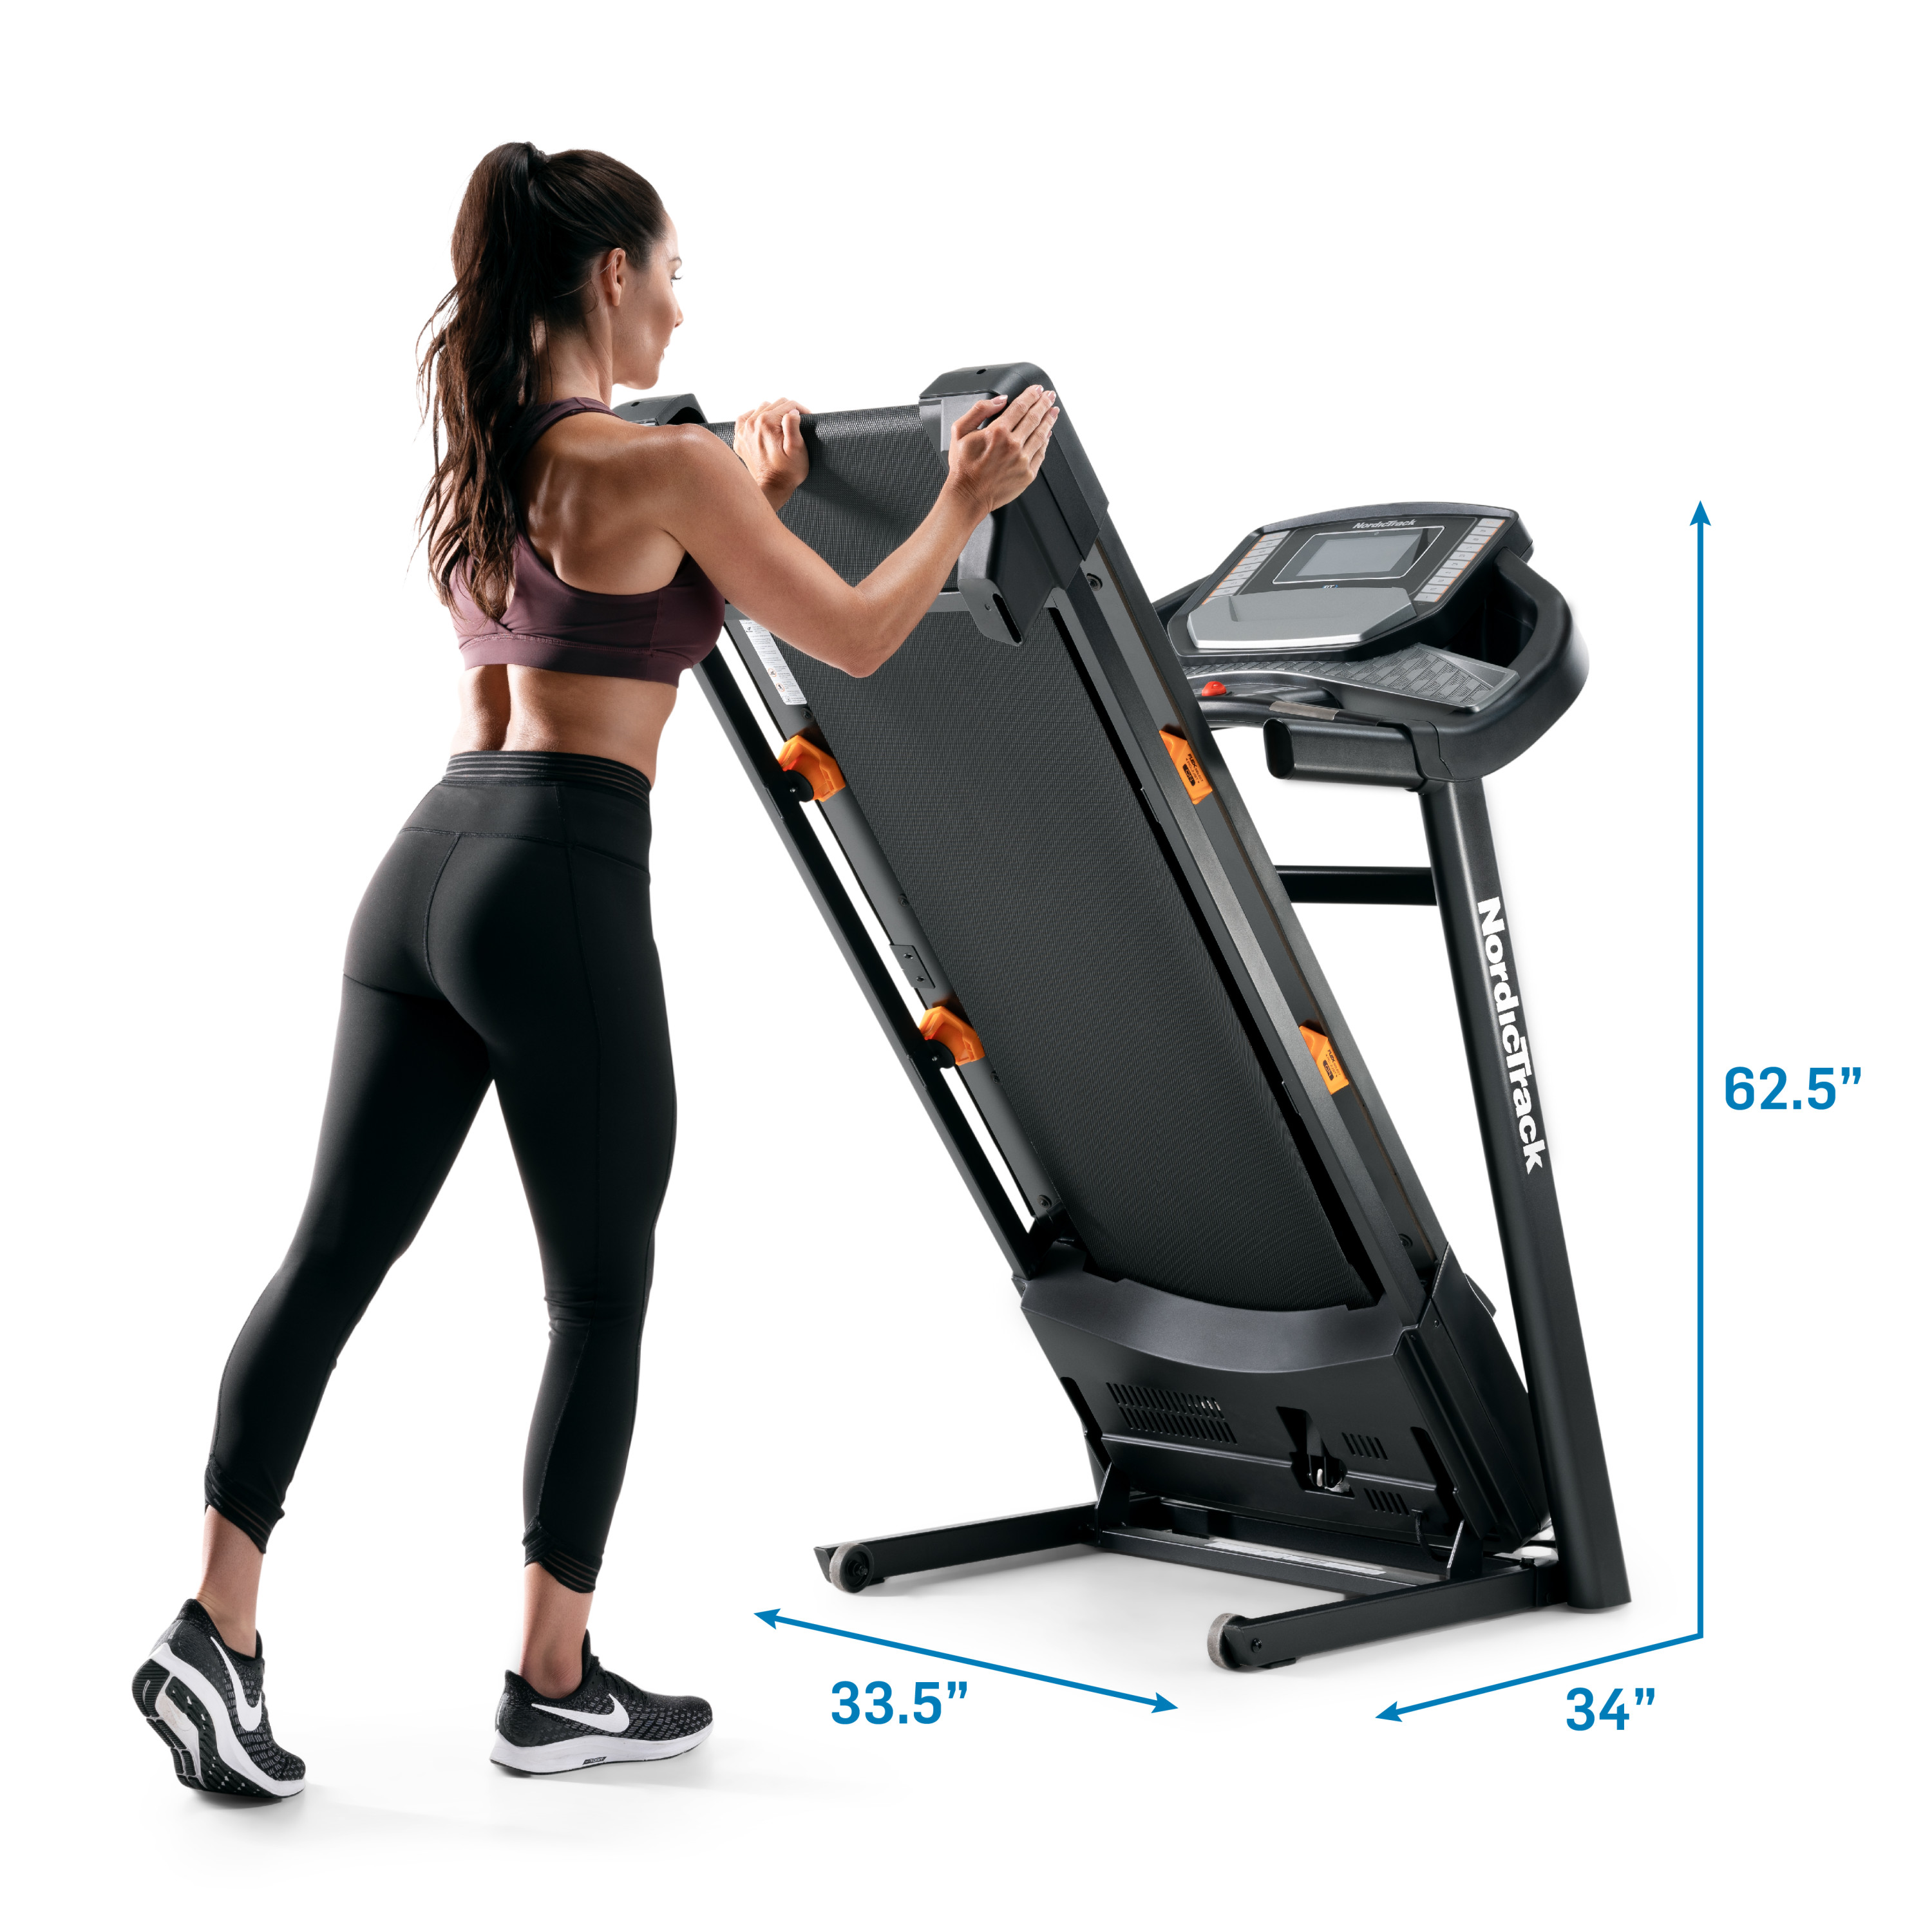 NordicTrack C 700 Folding Treadmill with 7” Interactive Touchscreen and 30-Day iFIT Membership - image 4 of 31